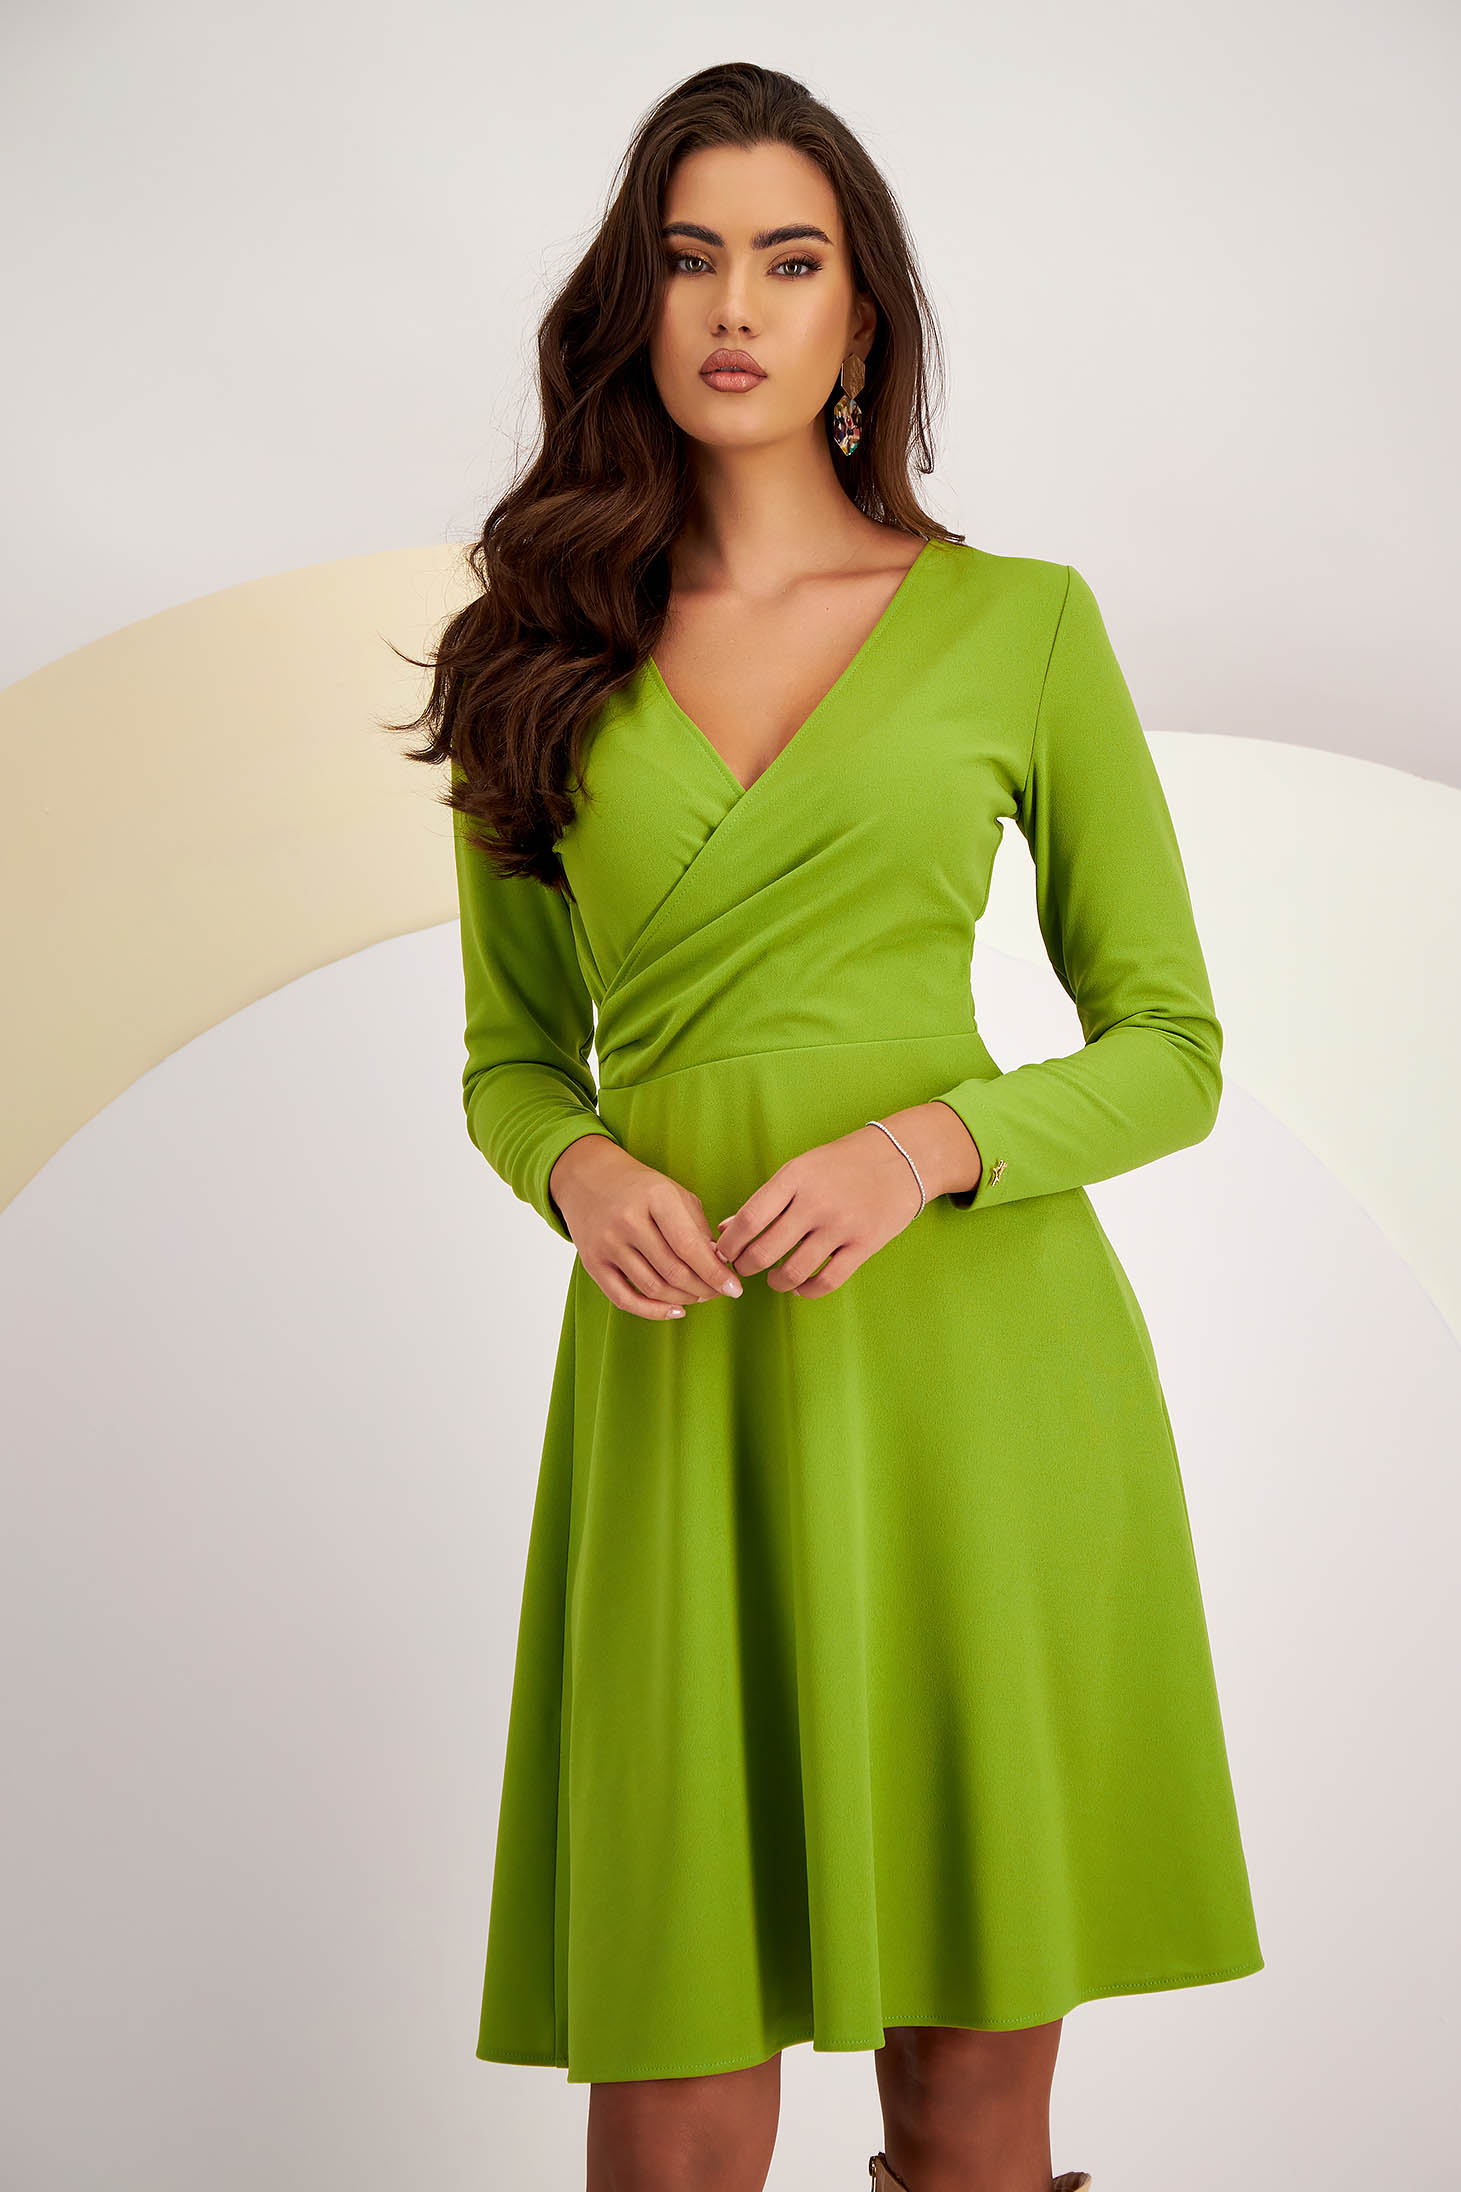 Olive Green Crepe Dress Knee-Length A-line with Crossover Neckline - StarShinerS